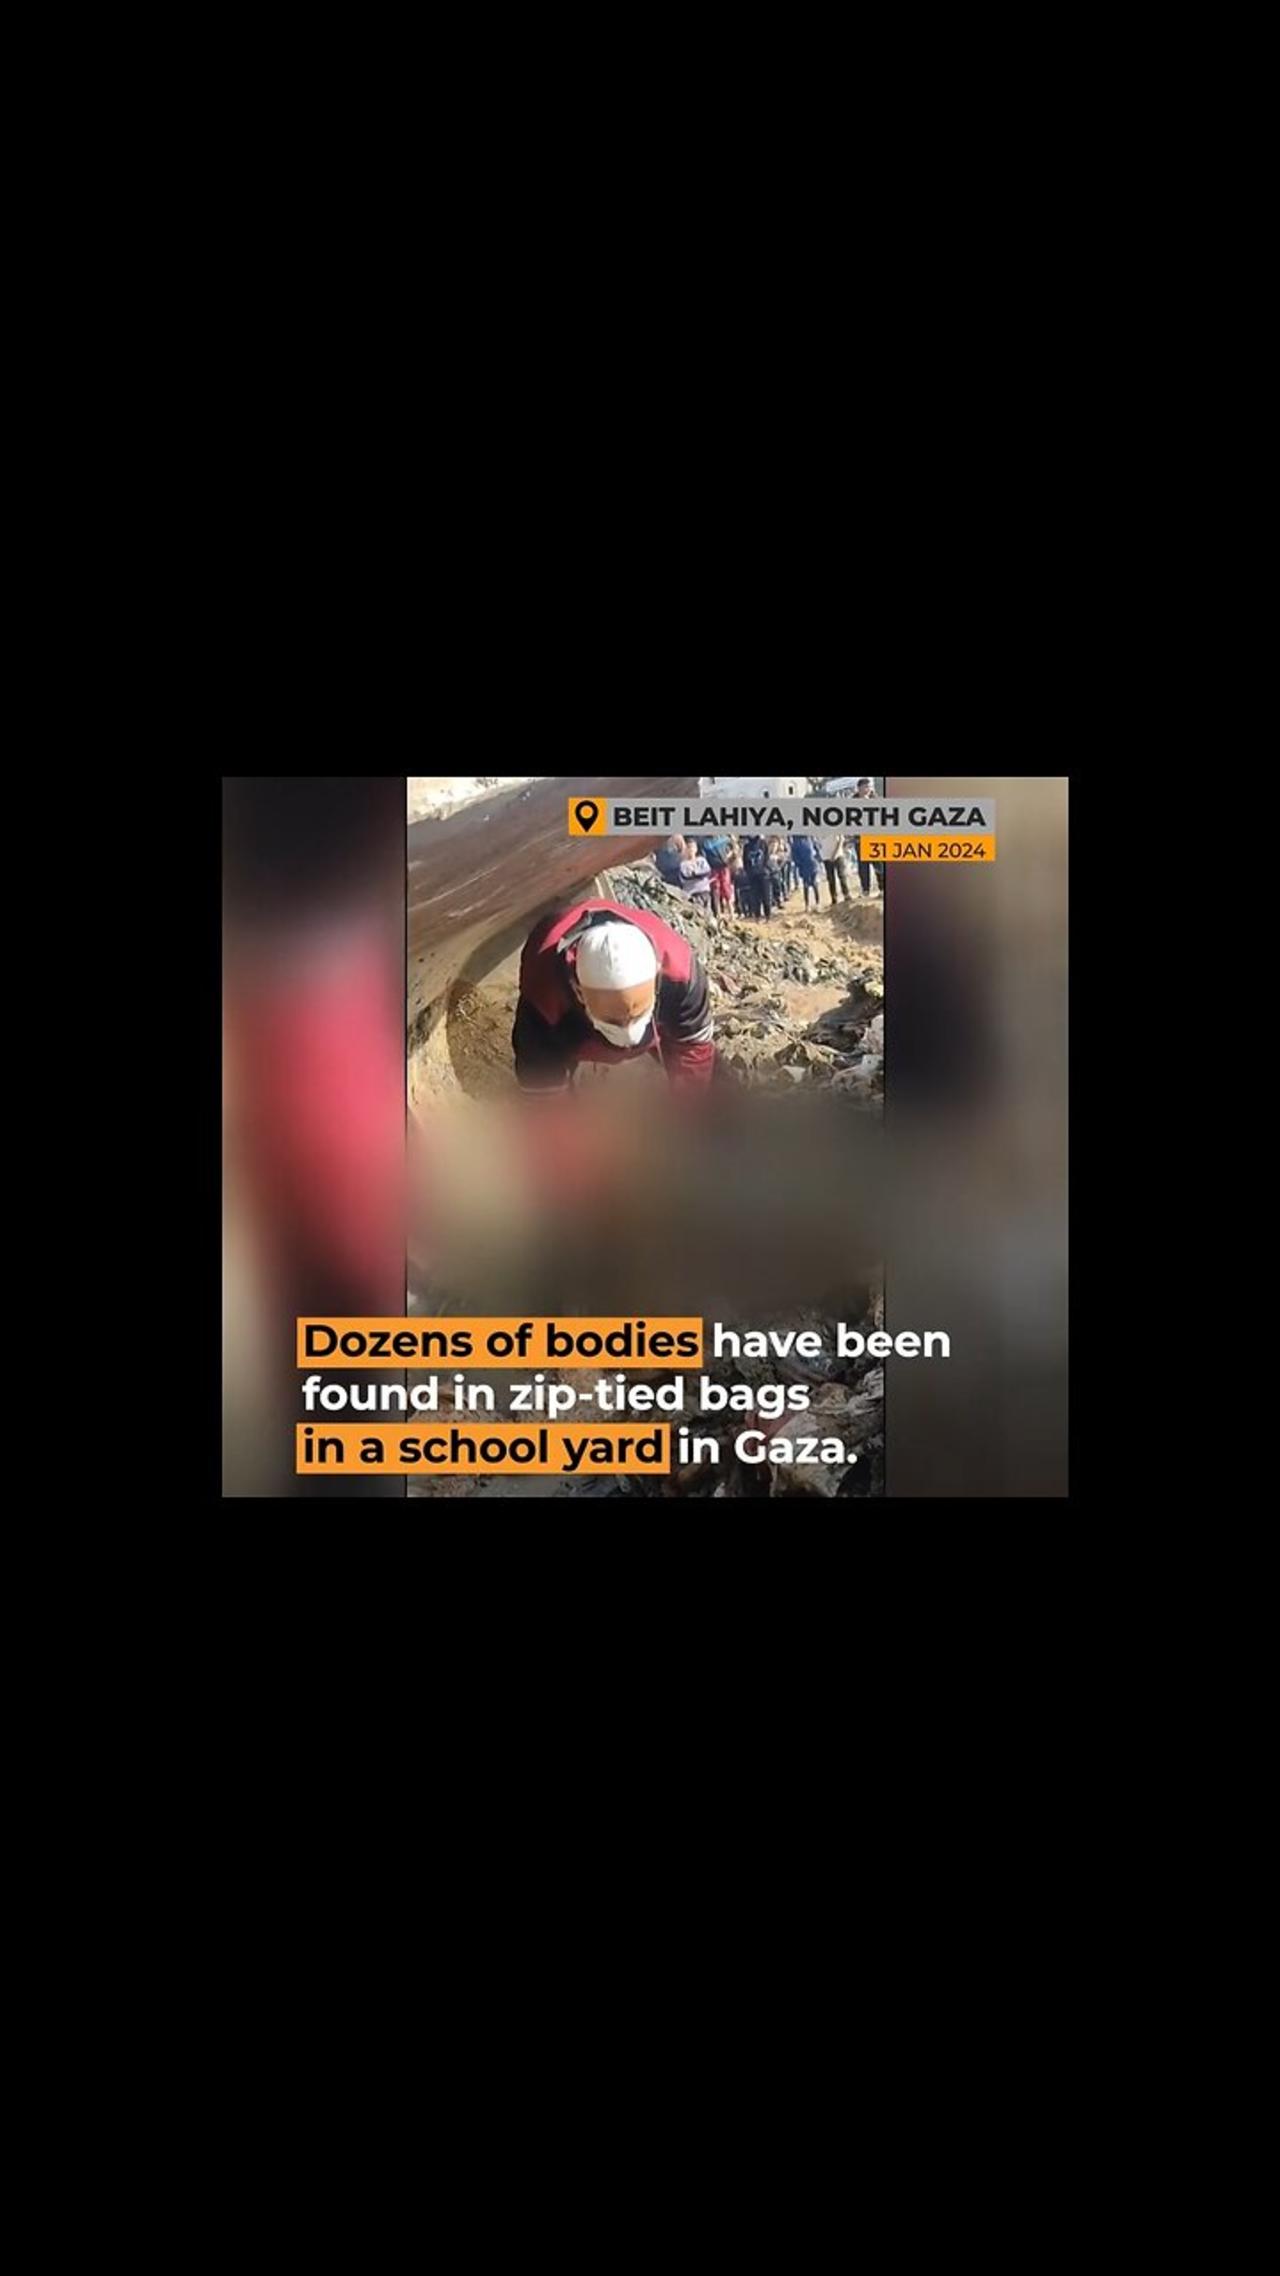 Bodies of ‘Torture Victims’ Found at Gaza School